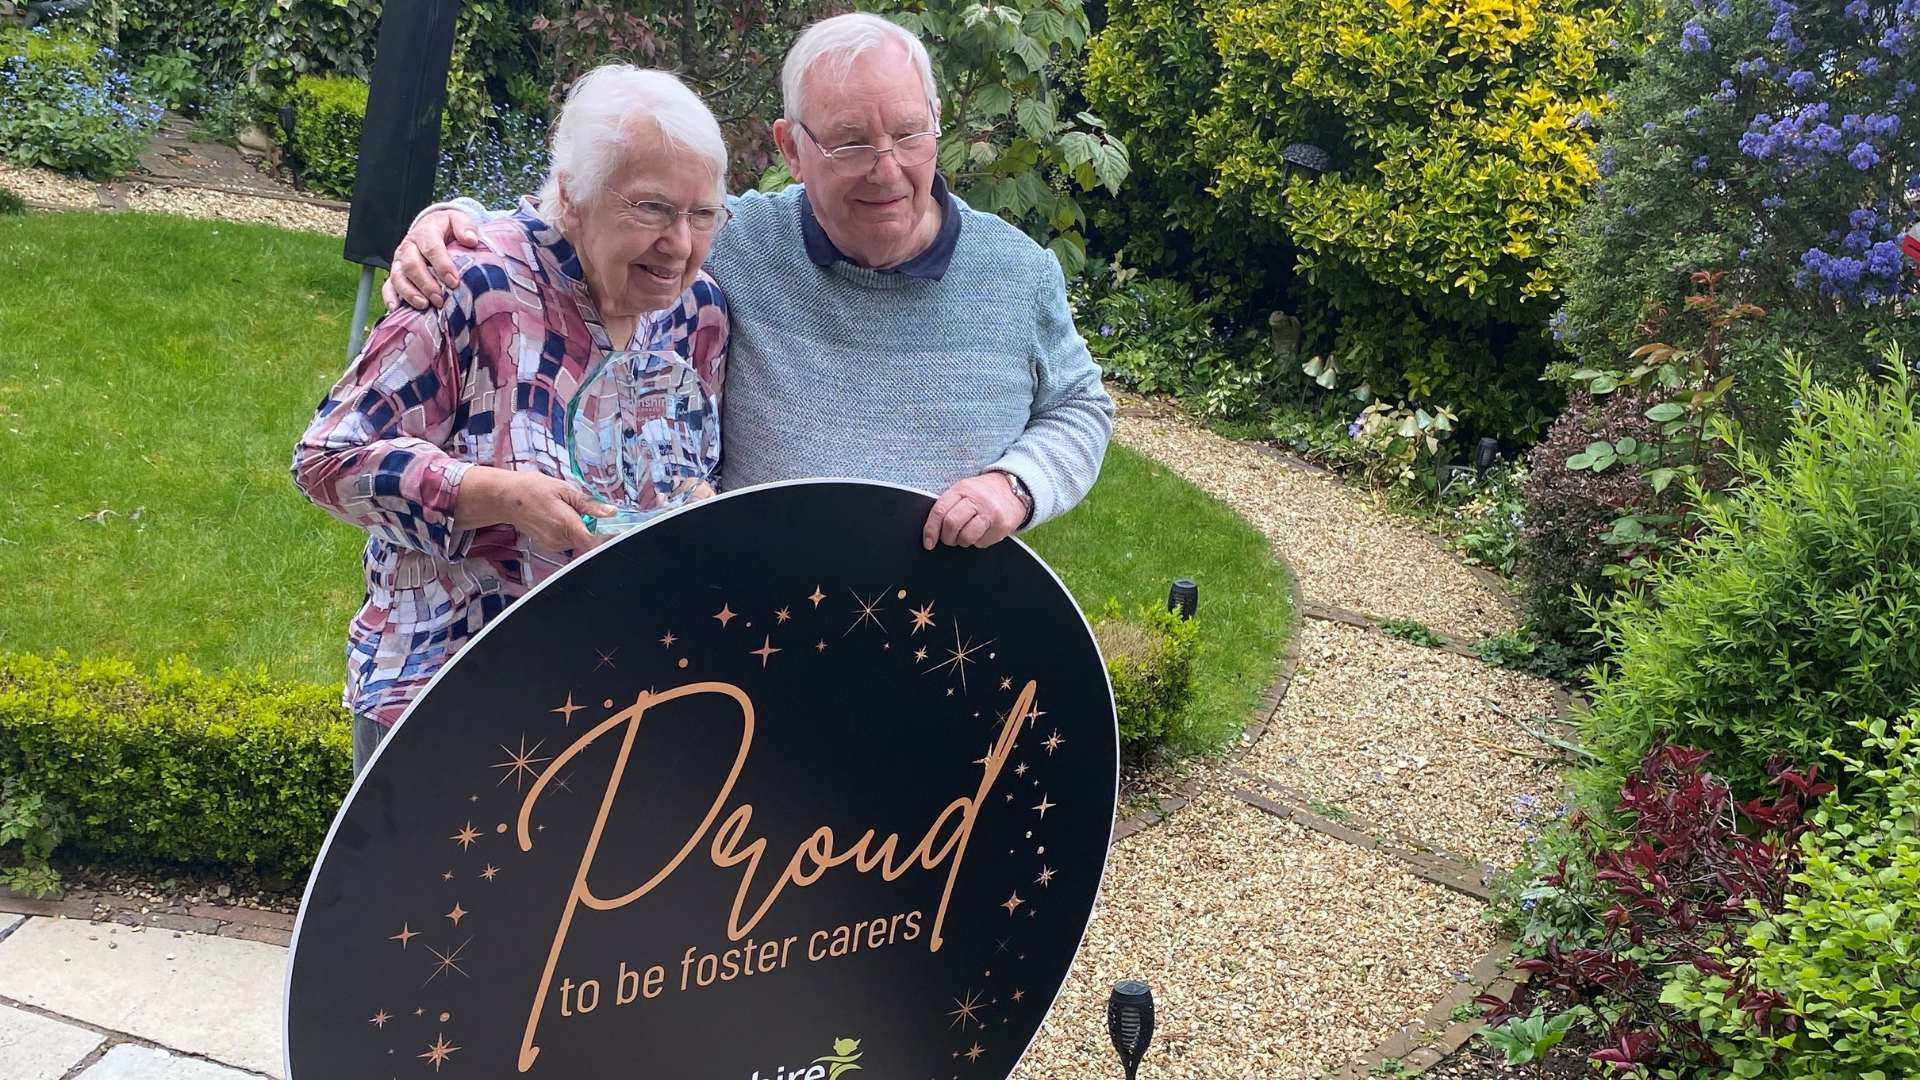 Rob and Marg stood holding a circular saying Proud Foster Carers in a garden setting